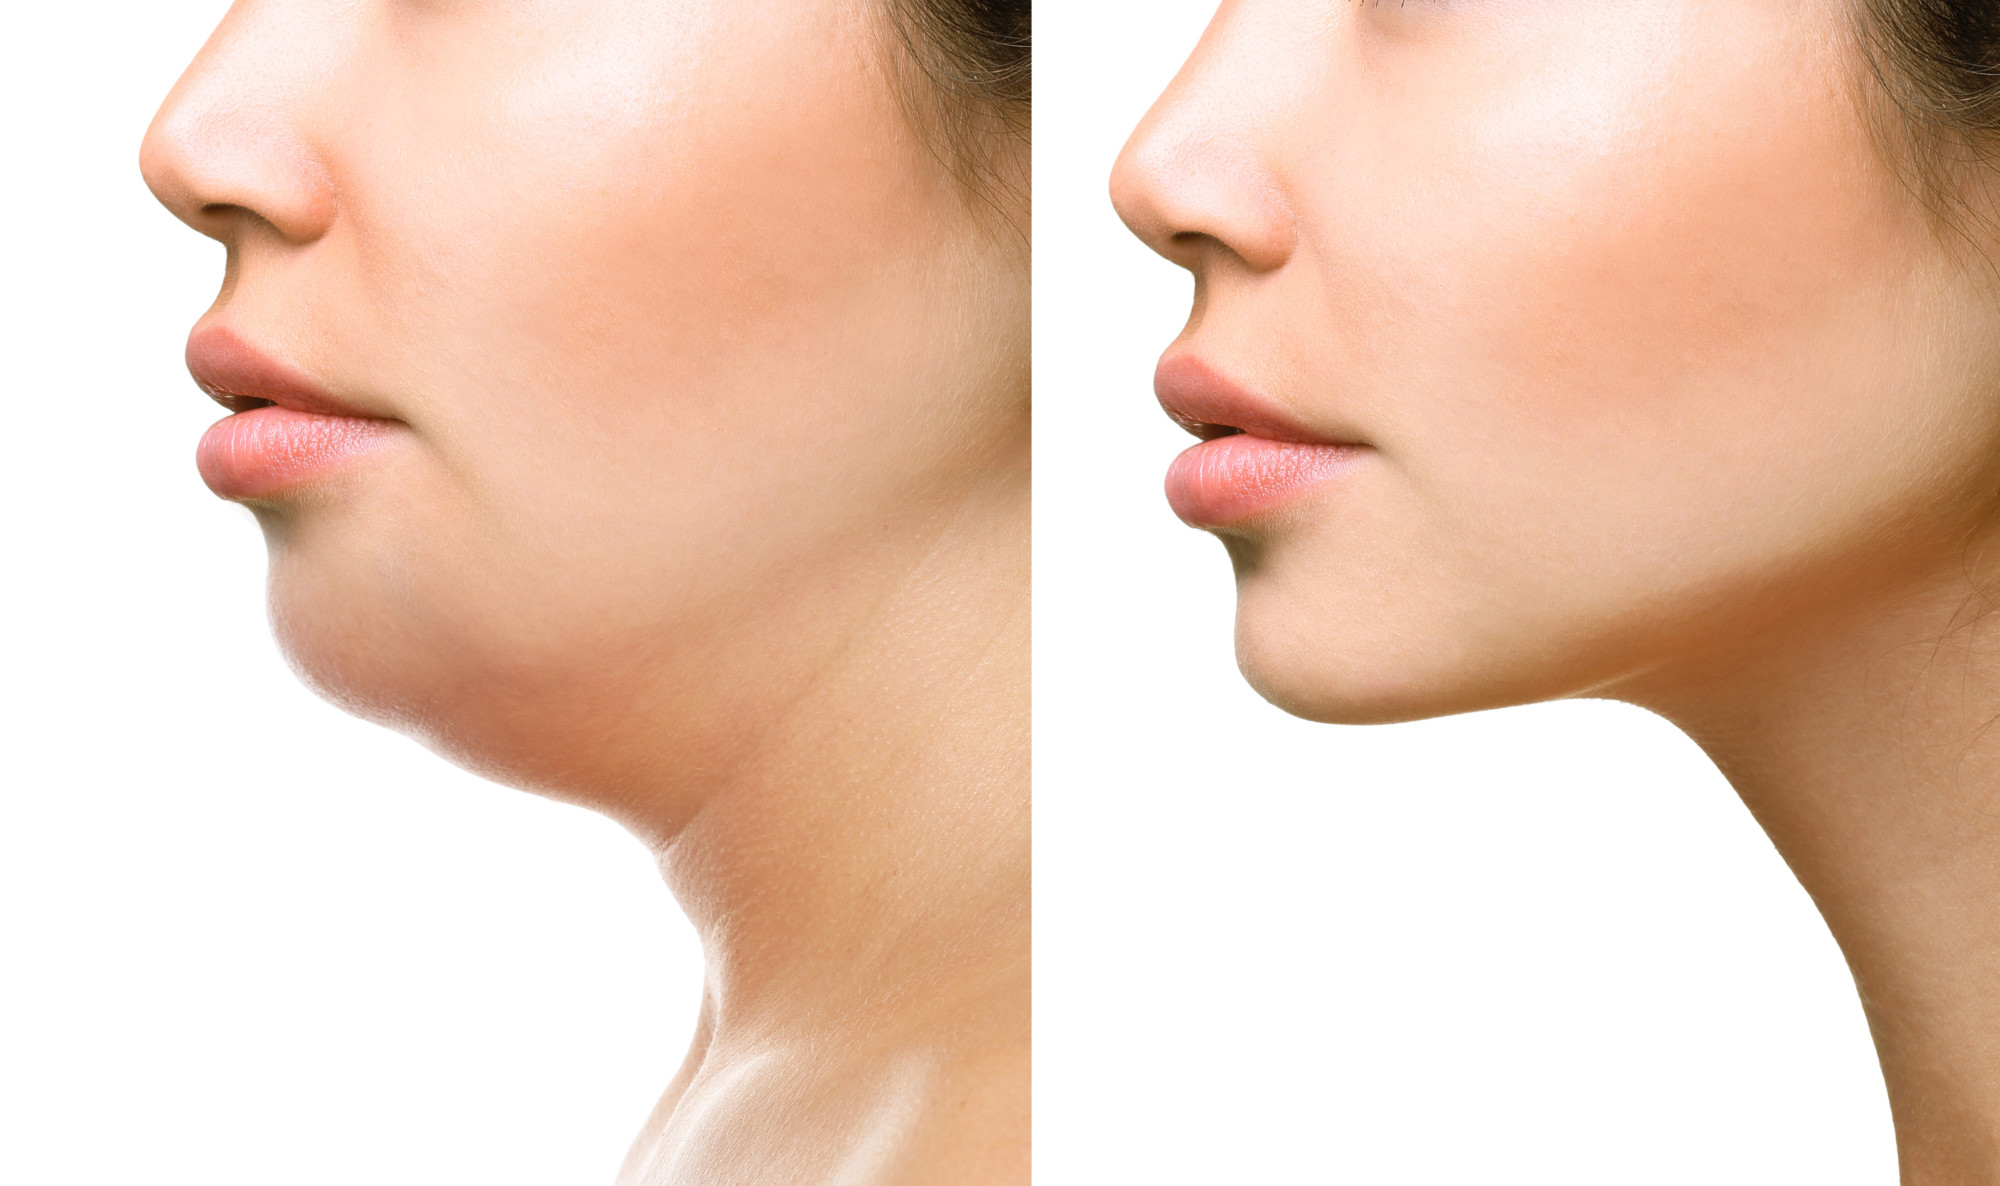 How Does Kybella Work?